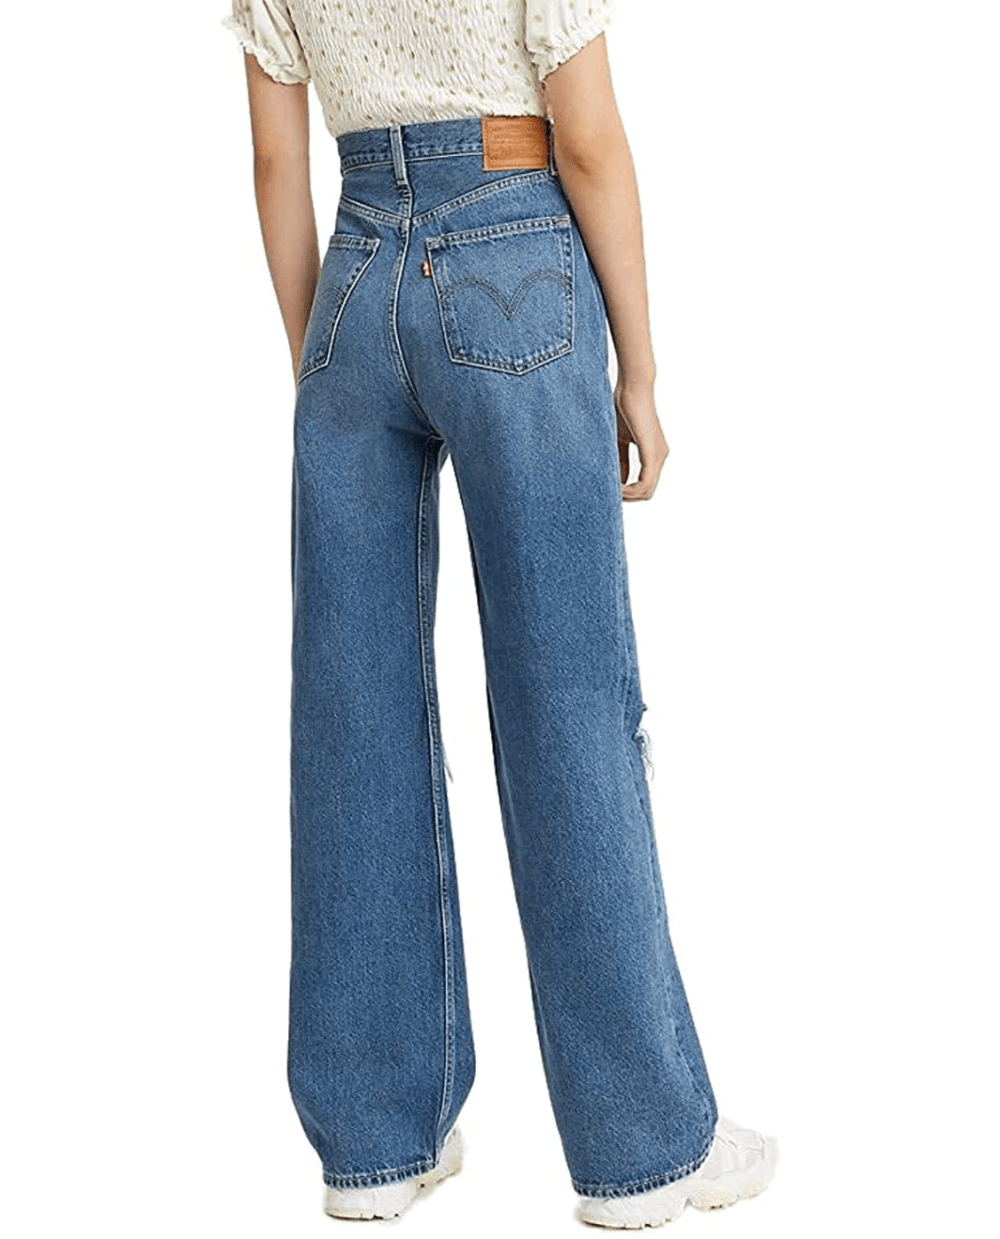 Levi’s Retro '90s-Style Jeans Are Currently 40% Off on Amazon | Us Weekly